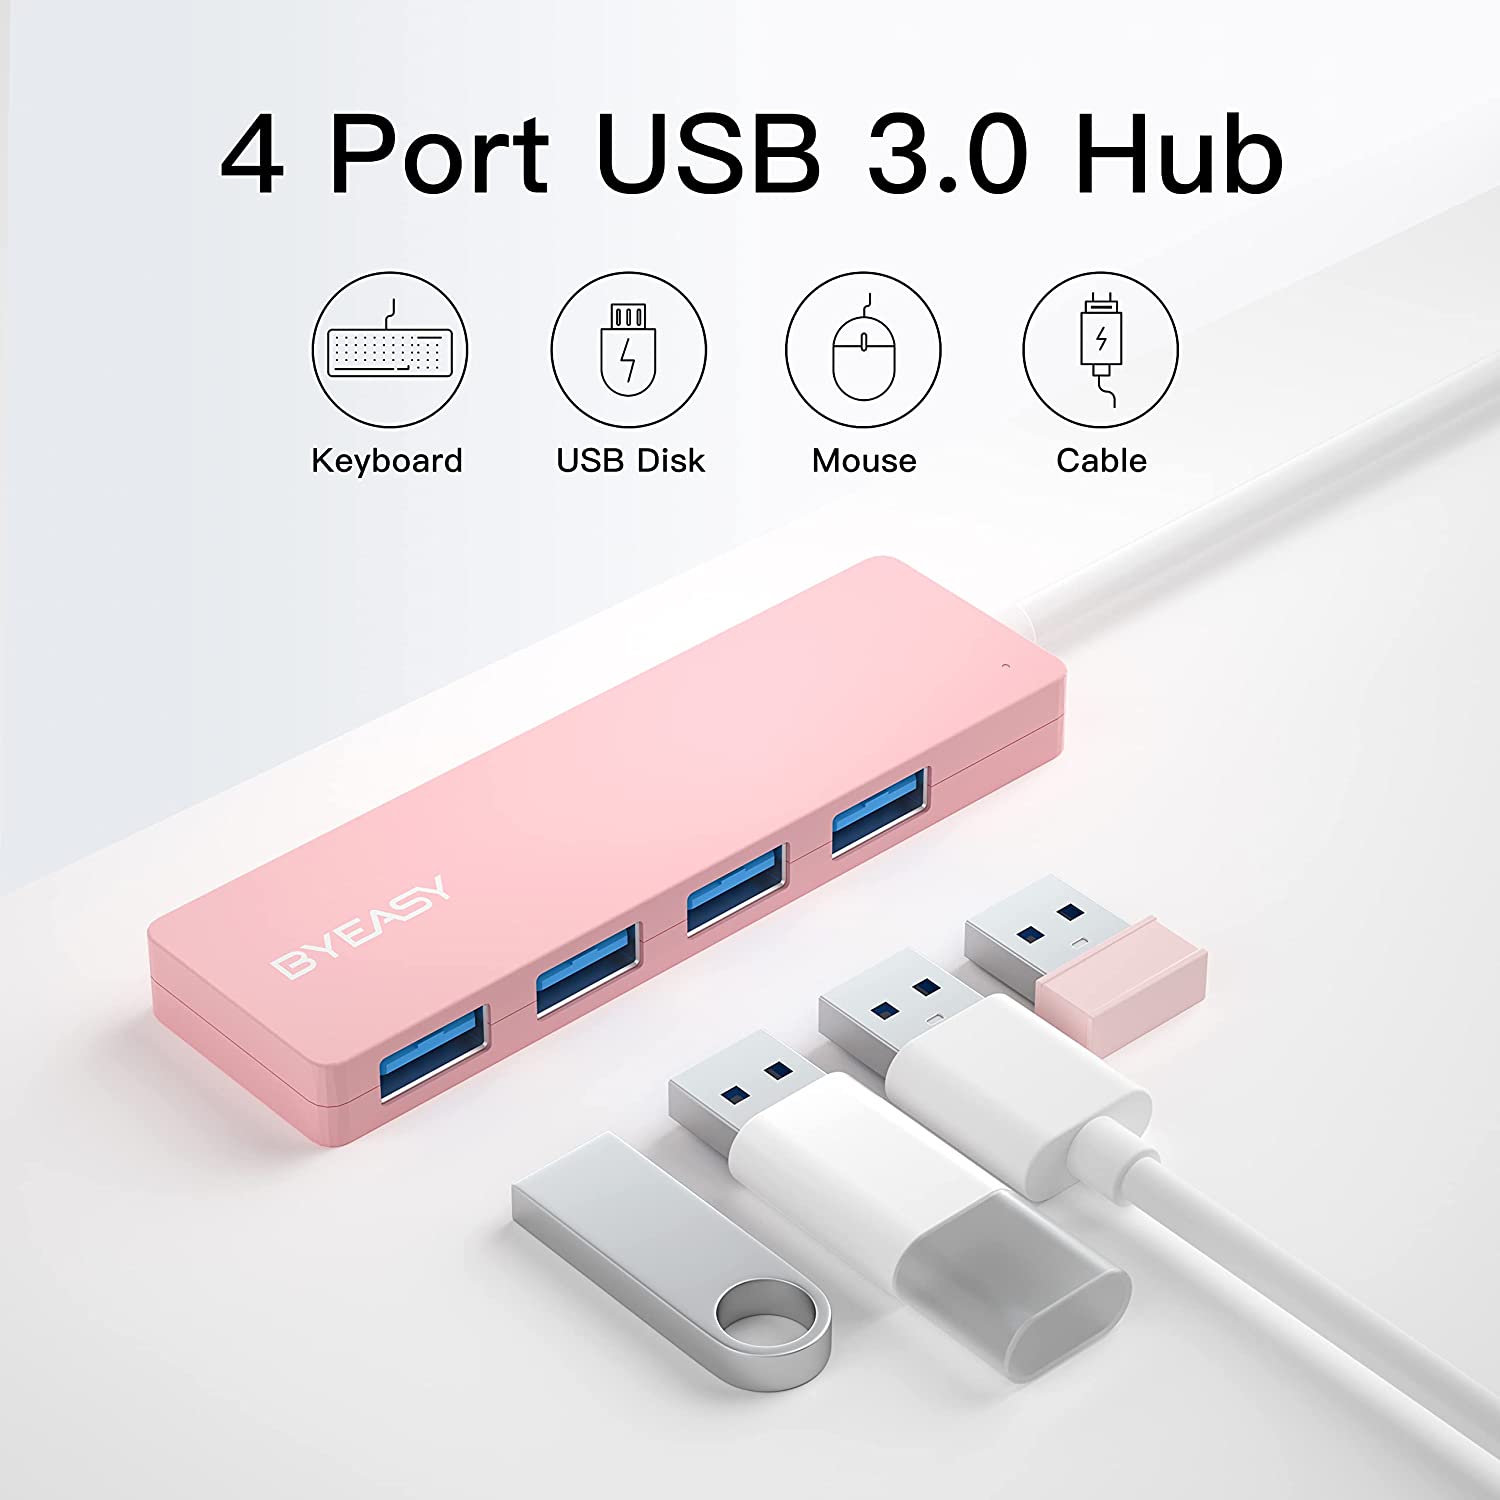 BYEASY USB Hub, USB 3.1 C to USB 3.0 Hub with 4 Ports and 2ft Extended  Cable, Ultra Slim Portable USB Splitter for MacBook, Mac Pro/Mini, iMac,  Ps4